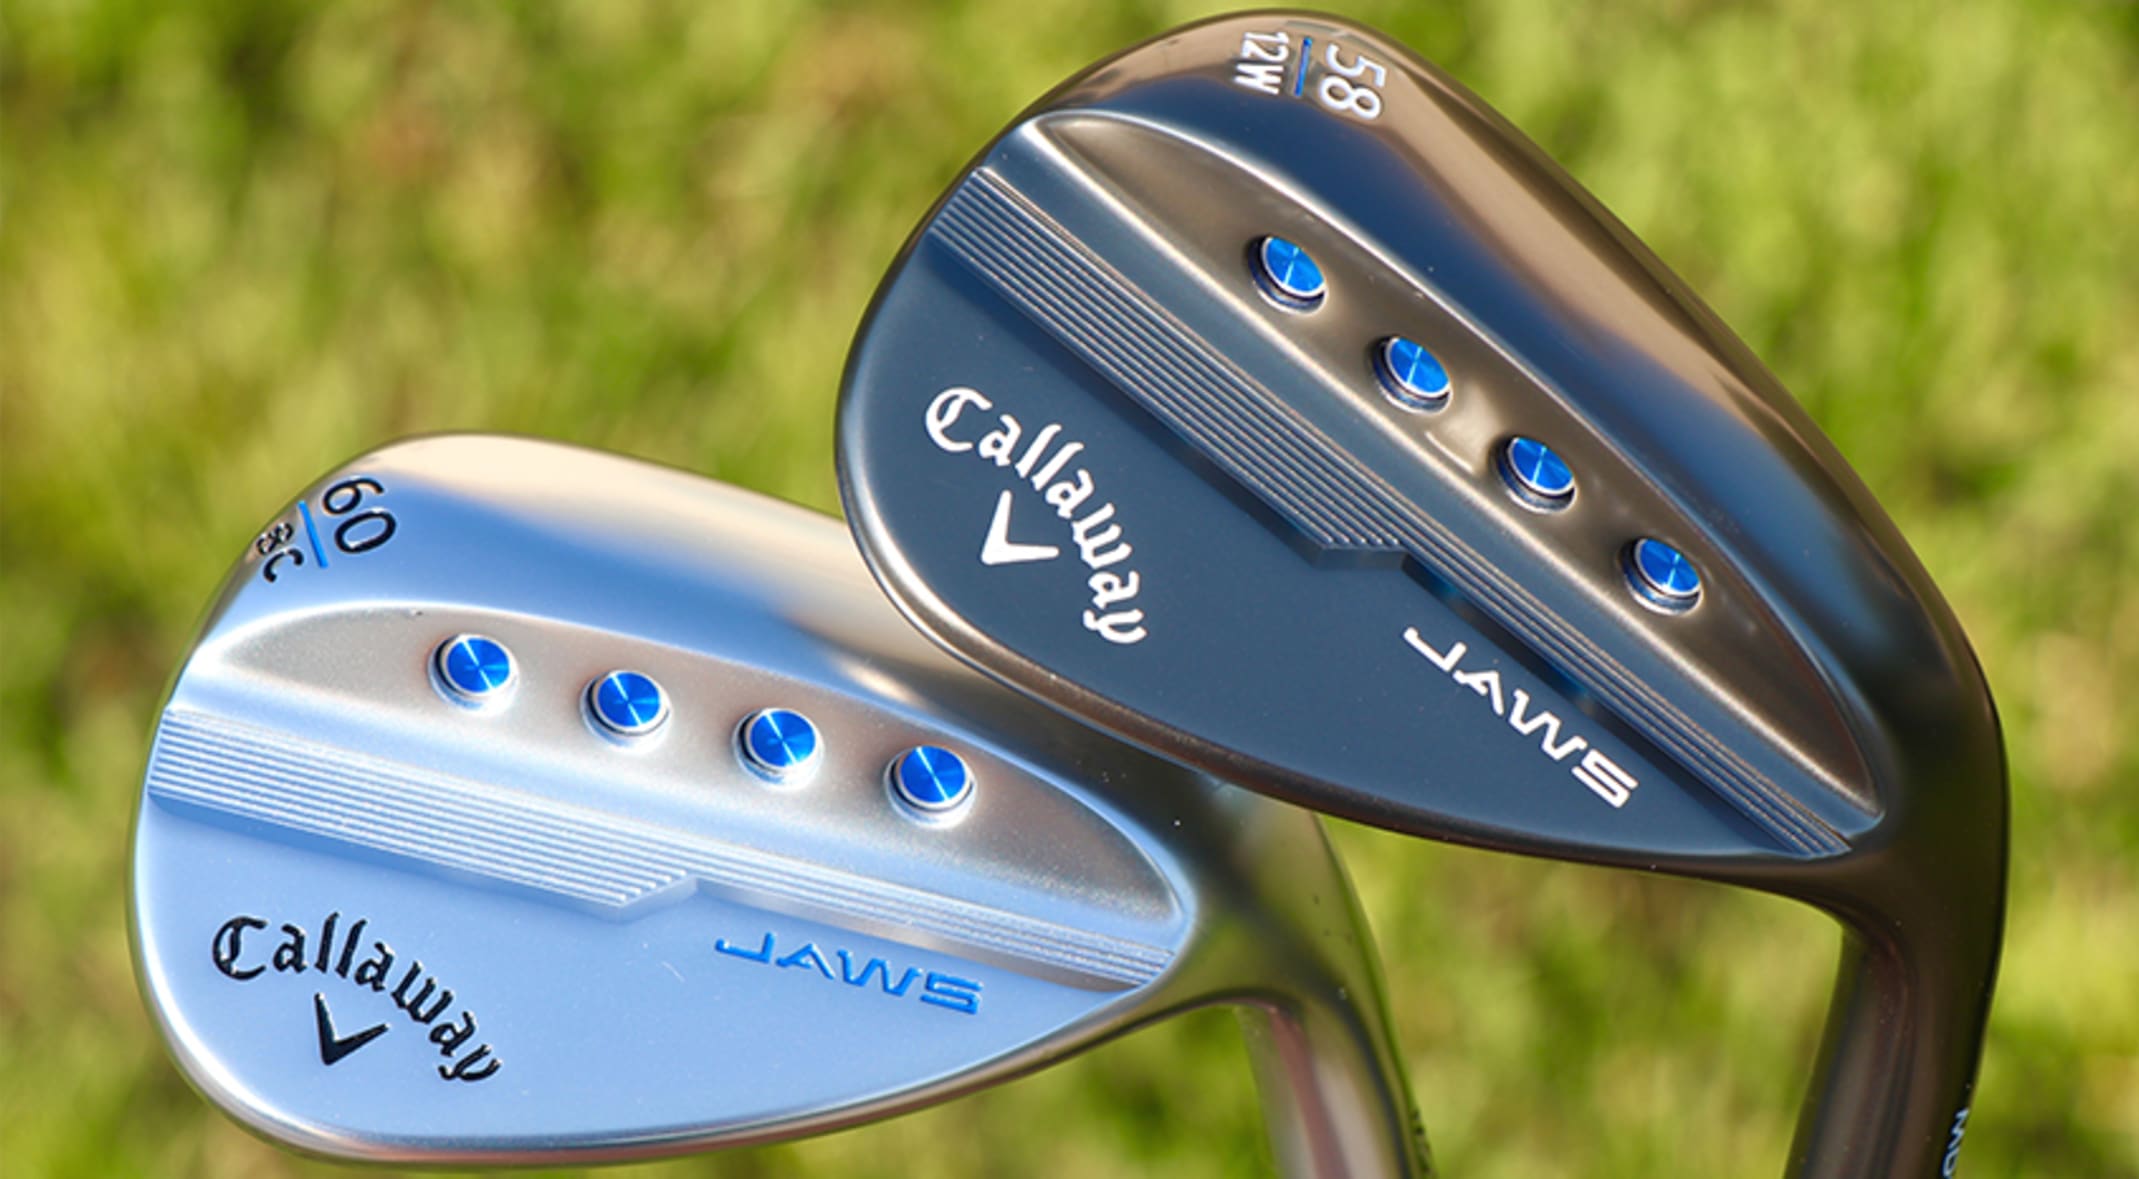 JAWS MD5 wedges, designed for more spin